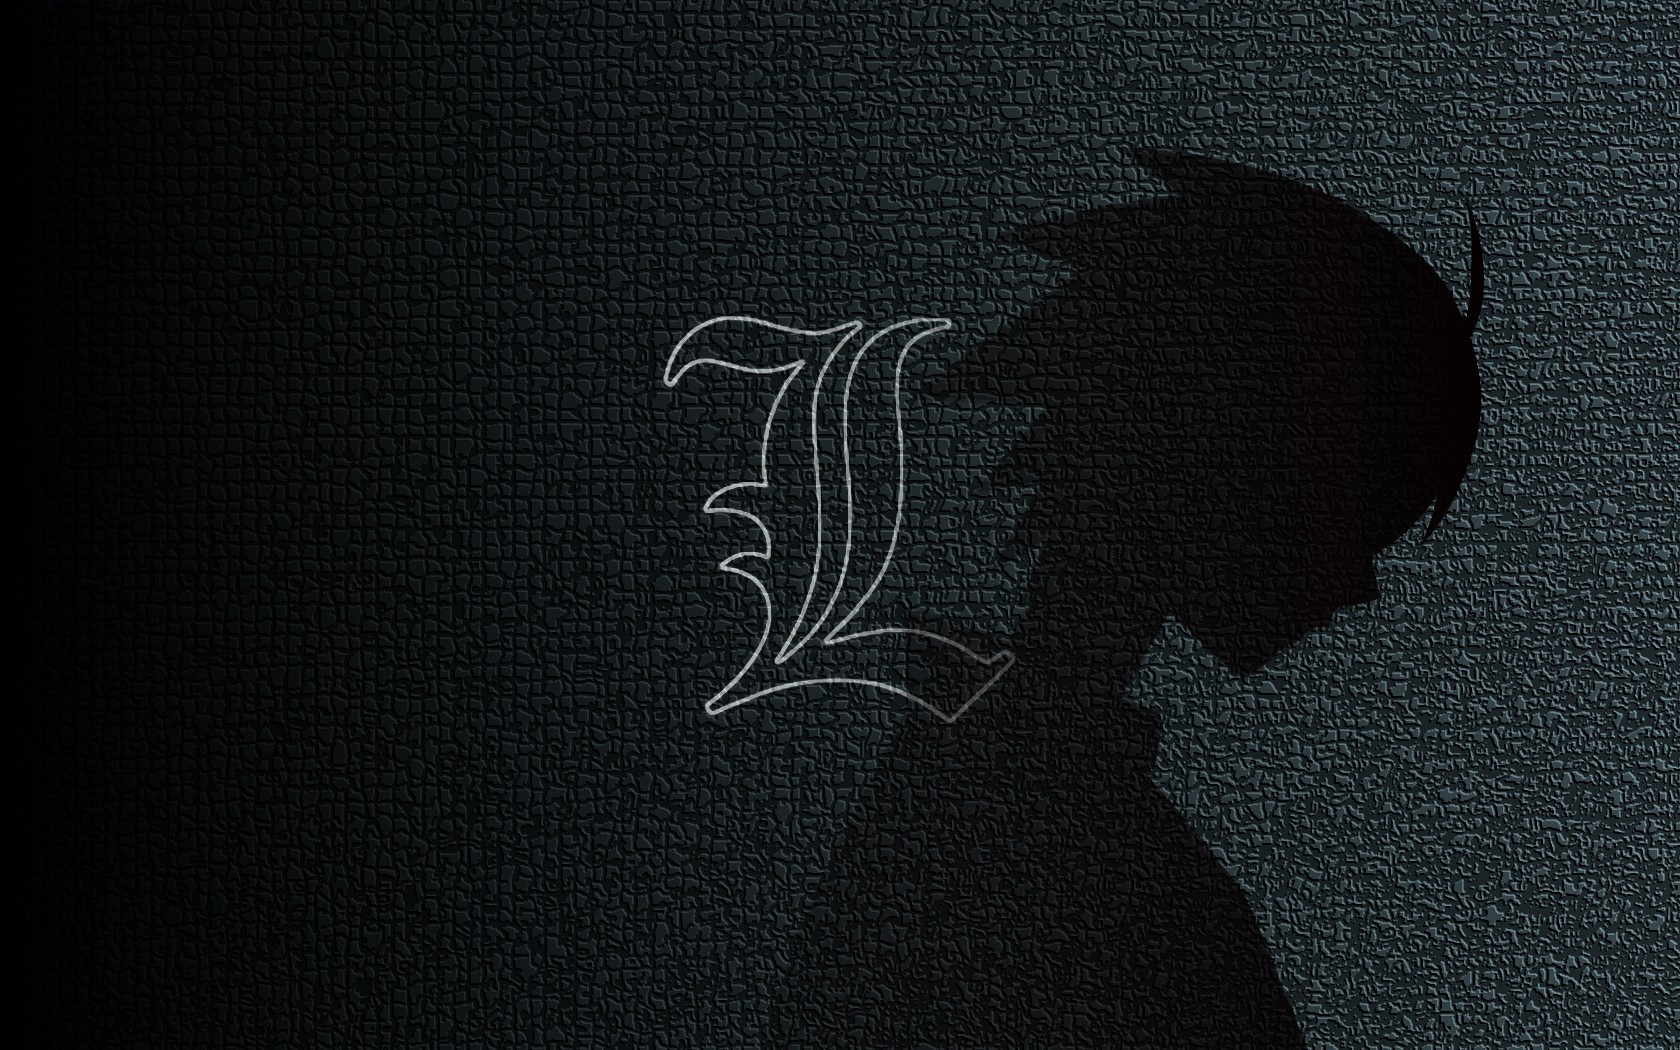 Dark silhouette of a character, featuring Death Note and Sayonara Zetsubou-Sensei references.